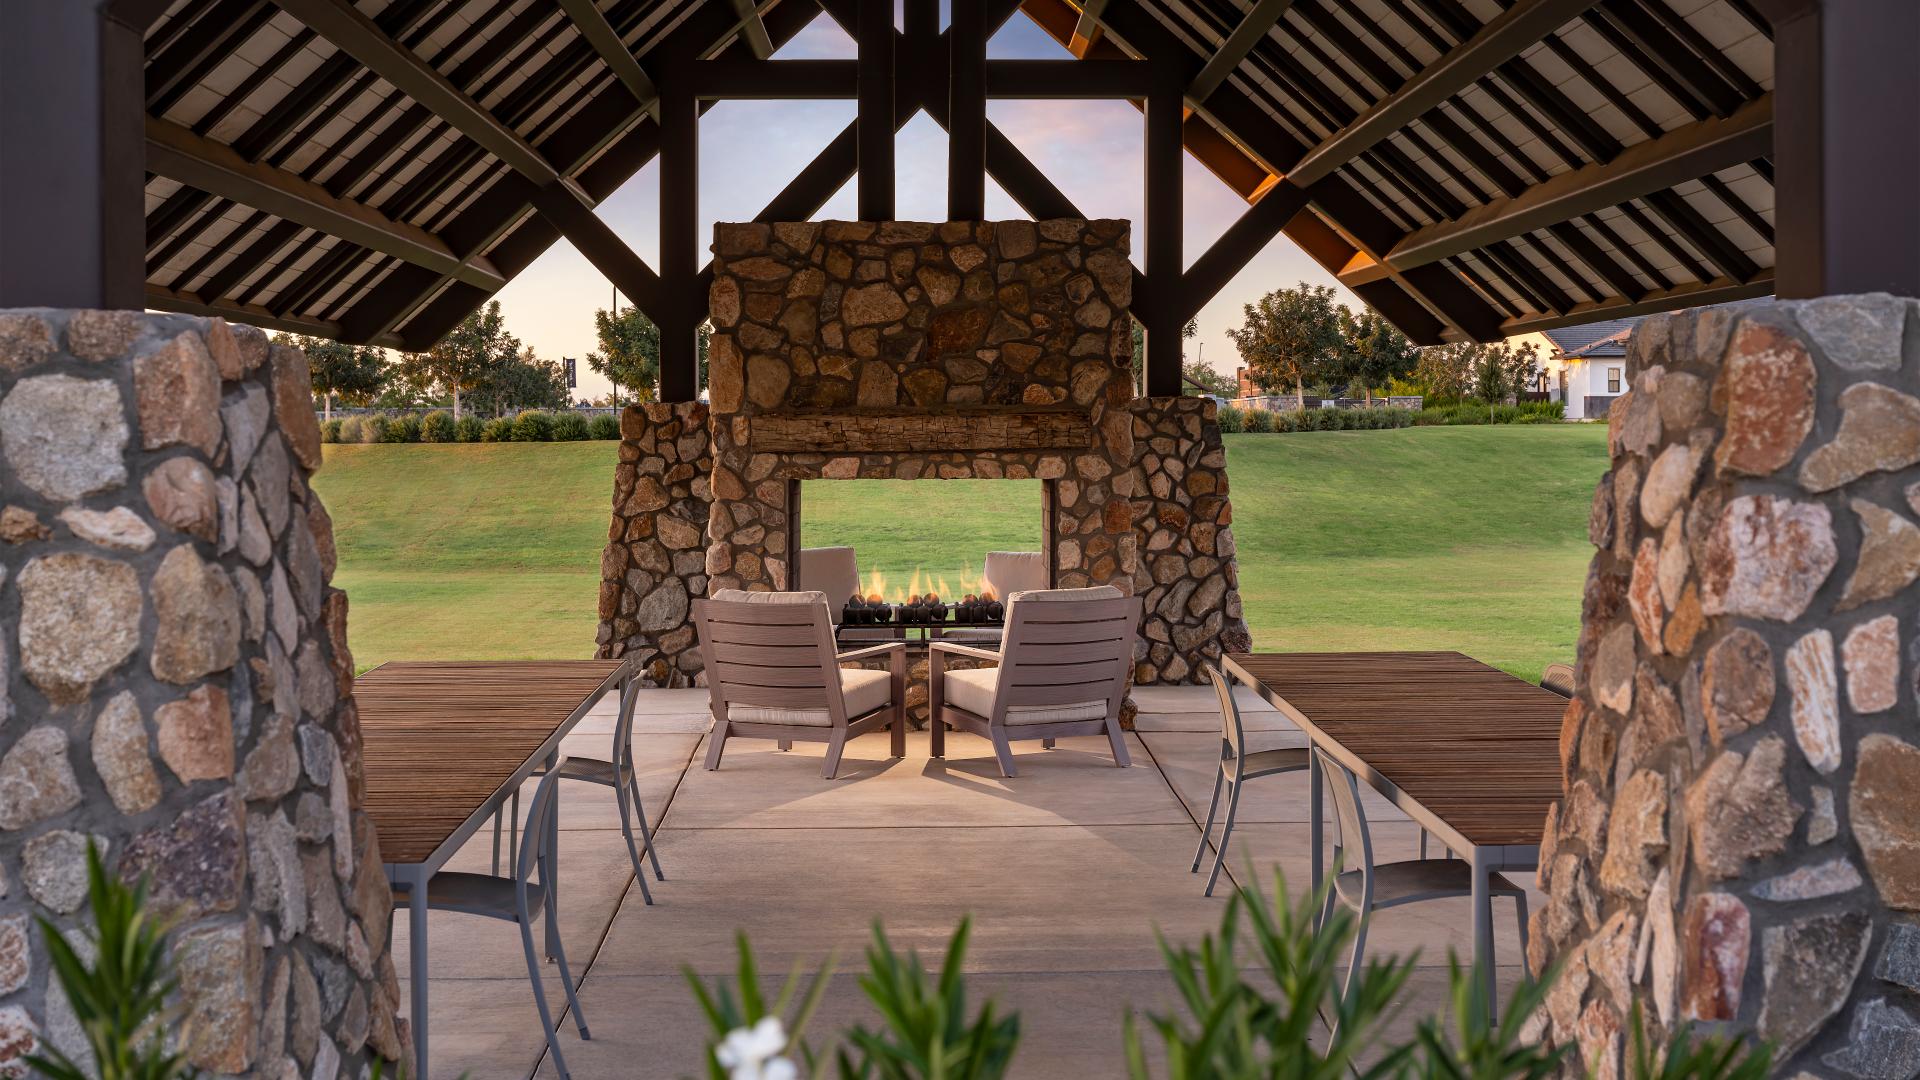 Community pavilion with outdoor fireplace